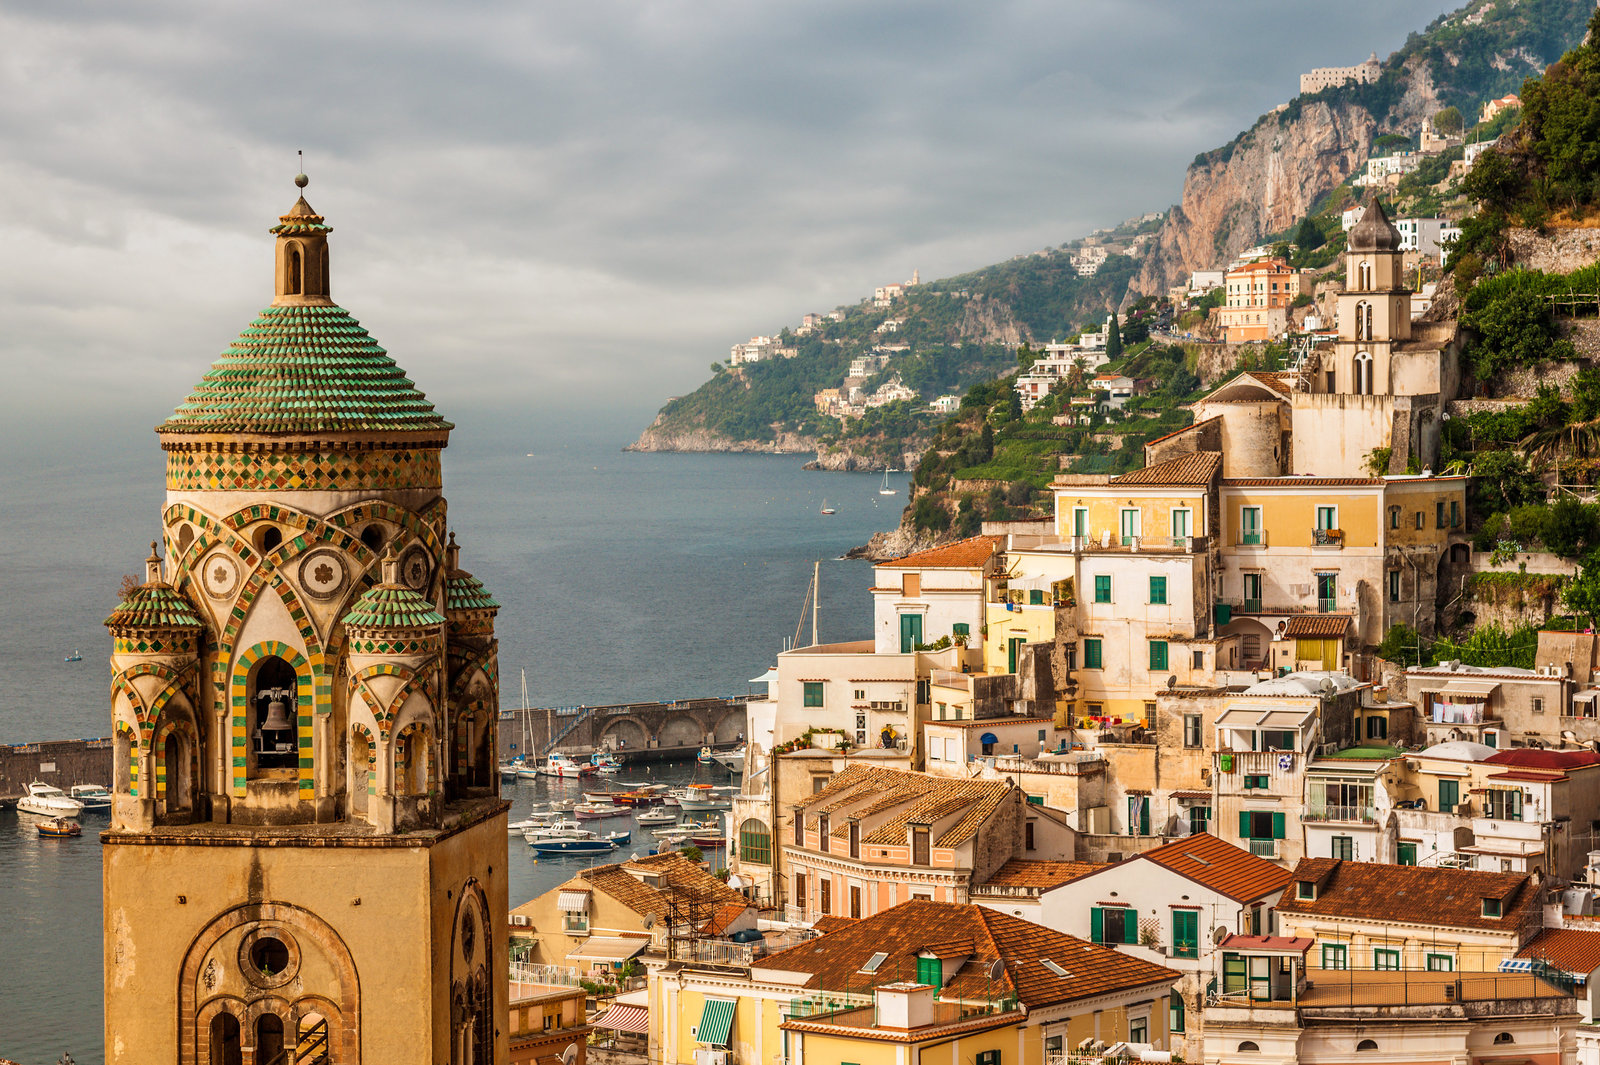 Amalfi city with bell tower of the Cathedra